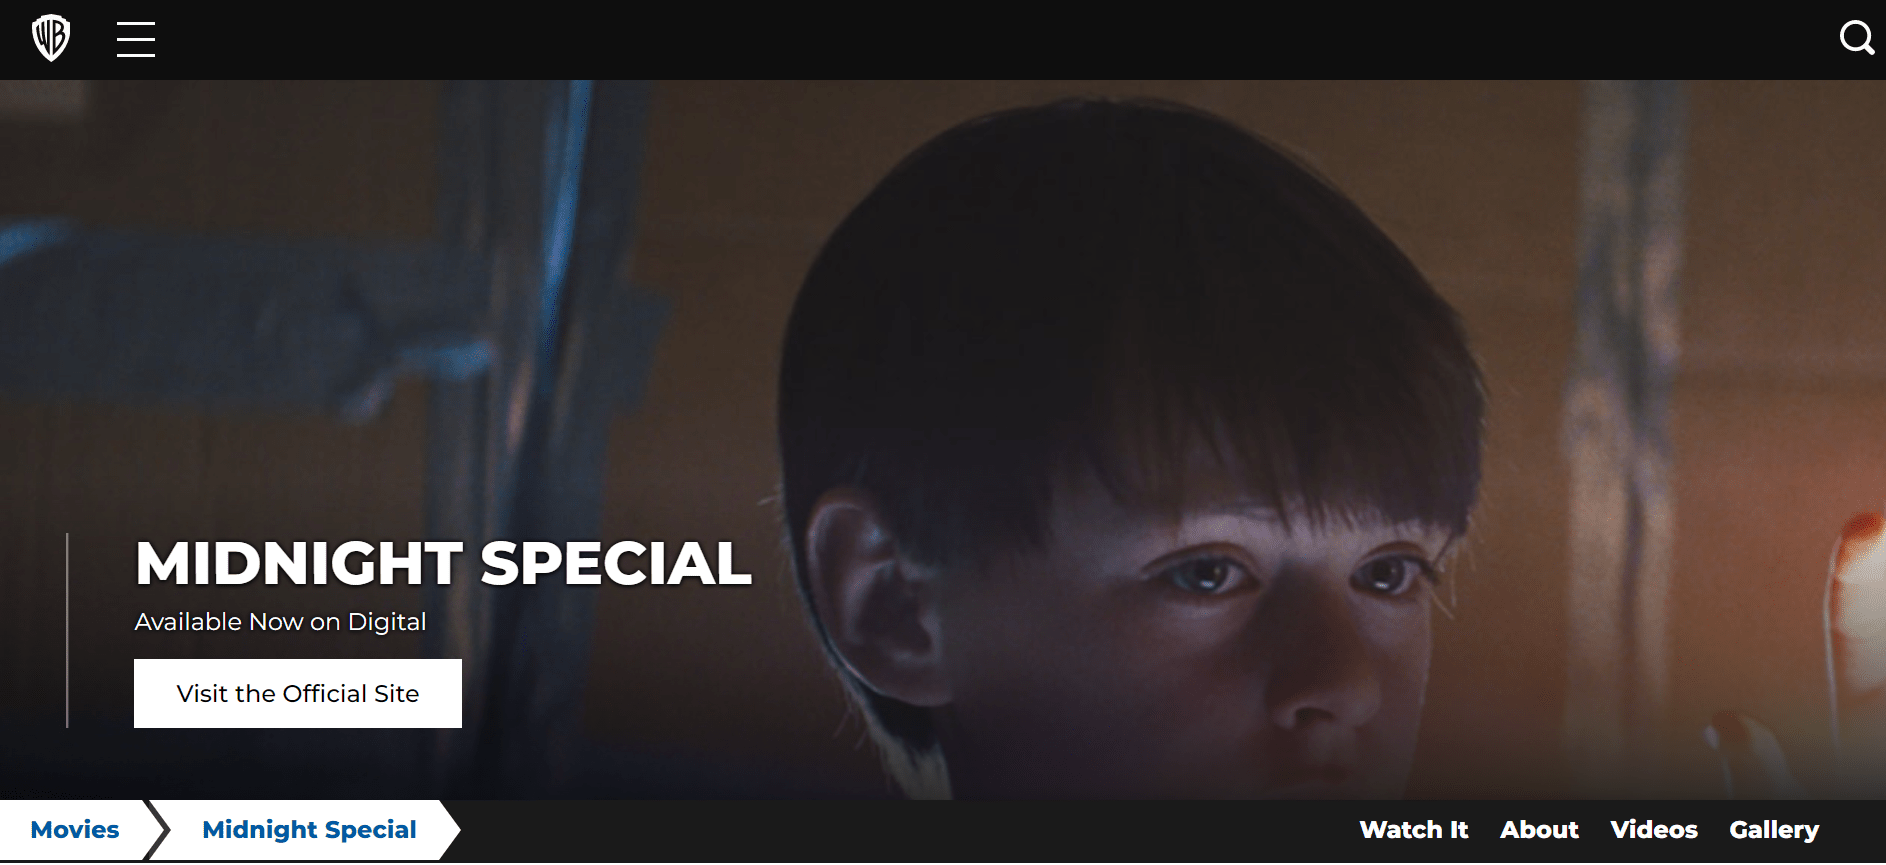 Landing page of WarnerBros.com | Midnight Special | Movies